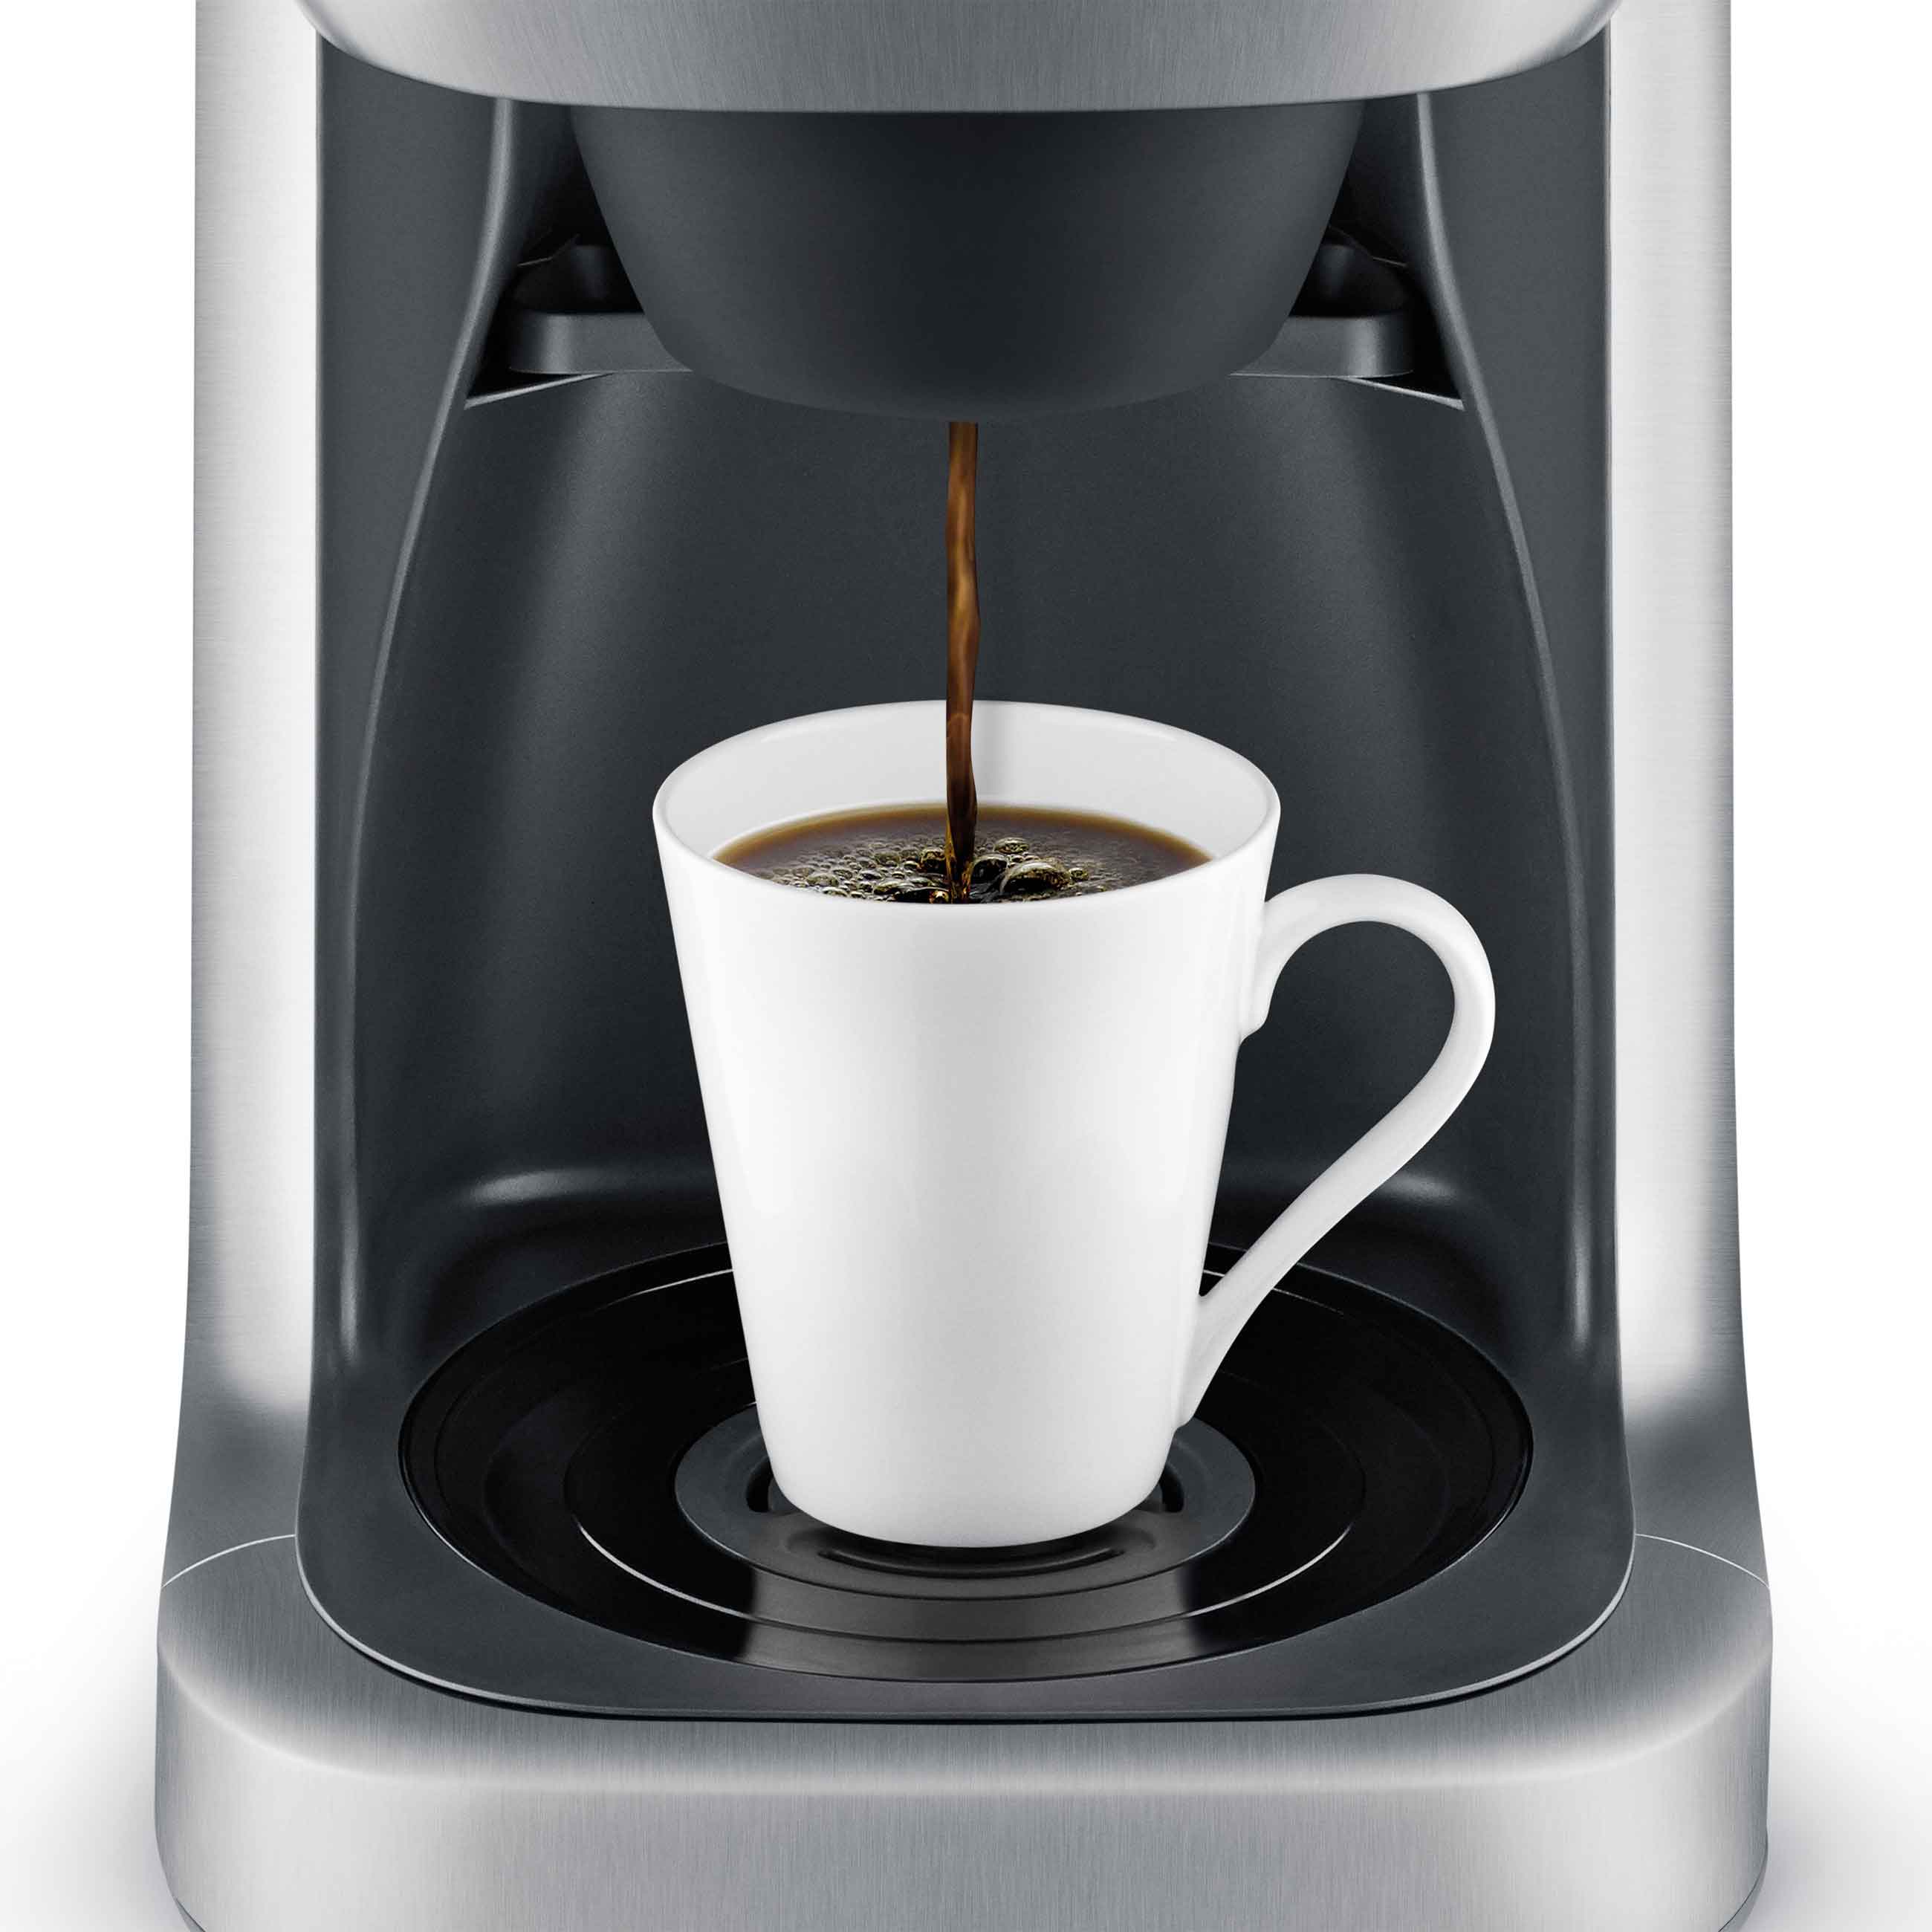 https://www.breville.com/content/dam/breville/ca/assets/coffee/finished-goods/bdc650-the-grind-control/bdc650bssusc-the-grind-control/images/BDC650BSSUSC-the-grind-control-beverages-coffee-carousel3.jpg